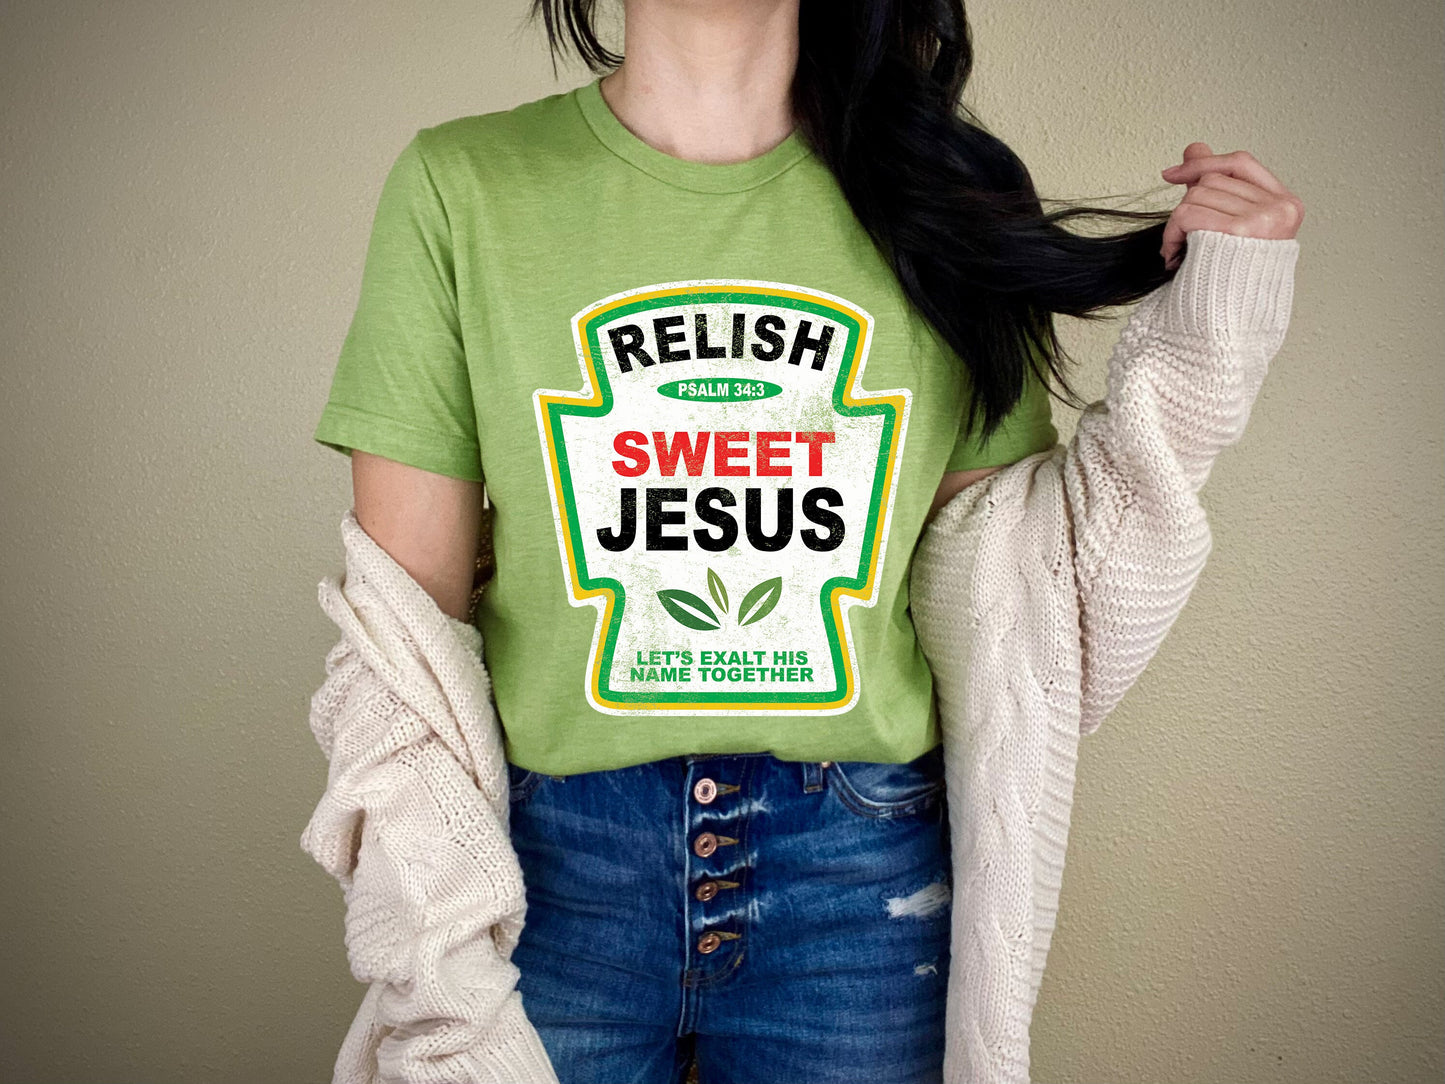 Relish Sweet Jesus Christian Condiment Jesus Saves Bible Verse Ultra Soft Graphic Tee Unisex Soft Tee T-shirt for Women or Men